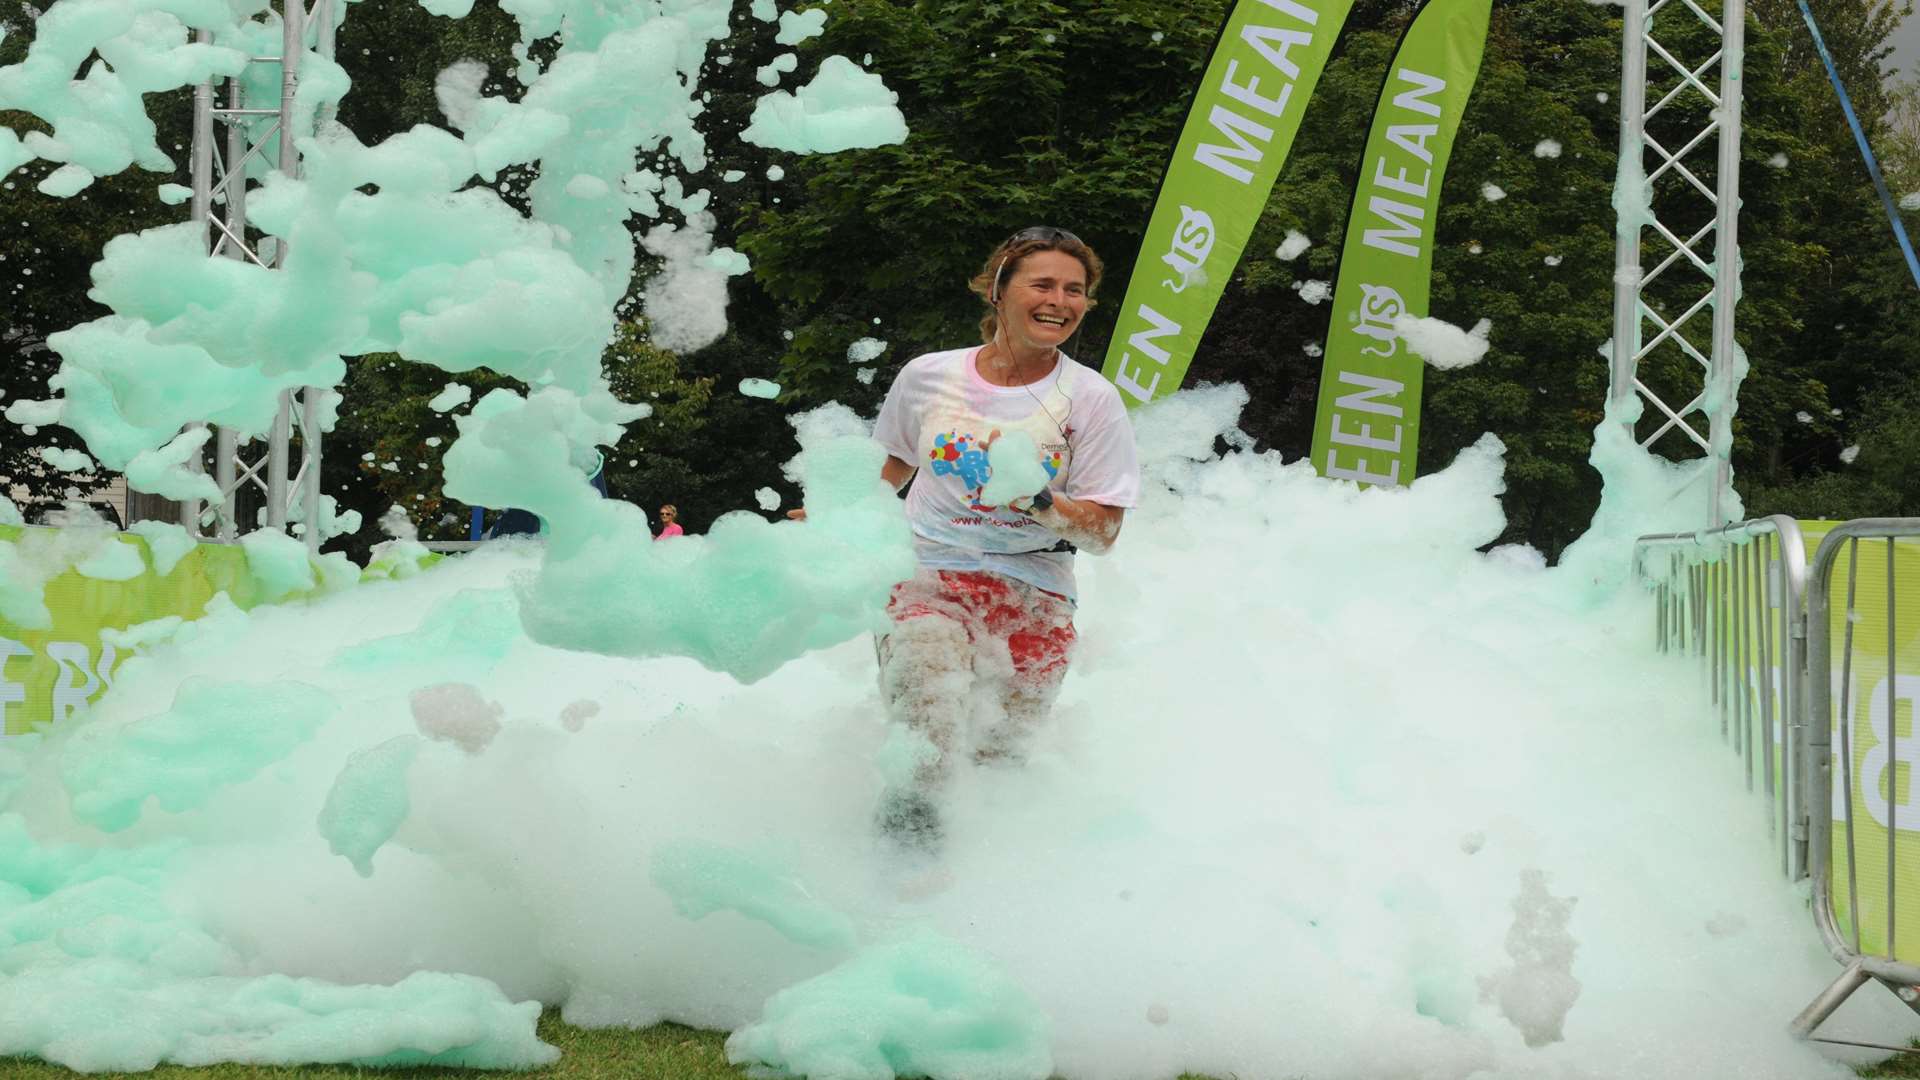 Runners sprinted through walls of coloured foam